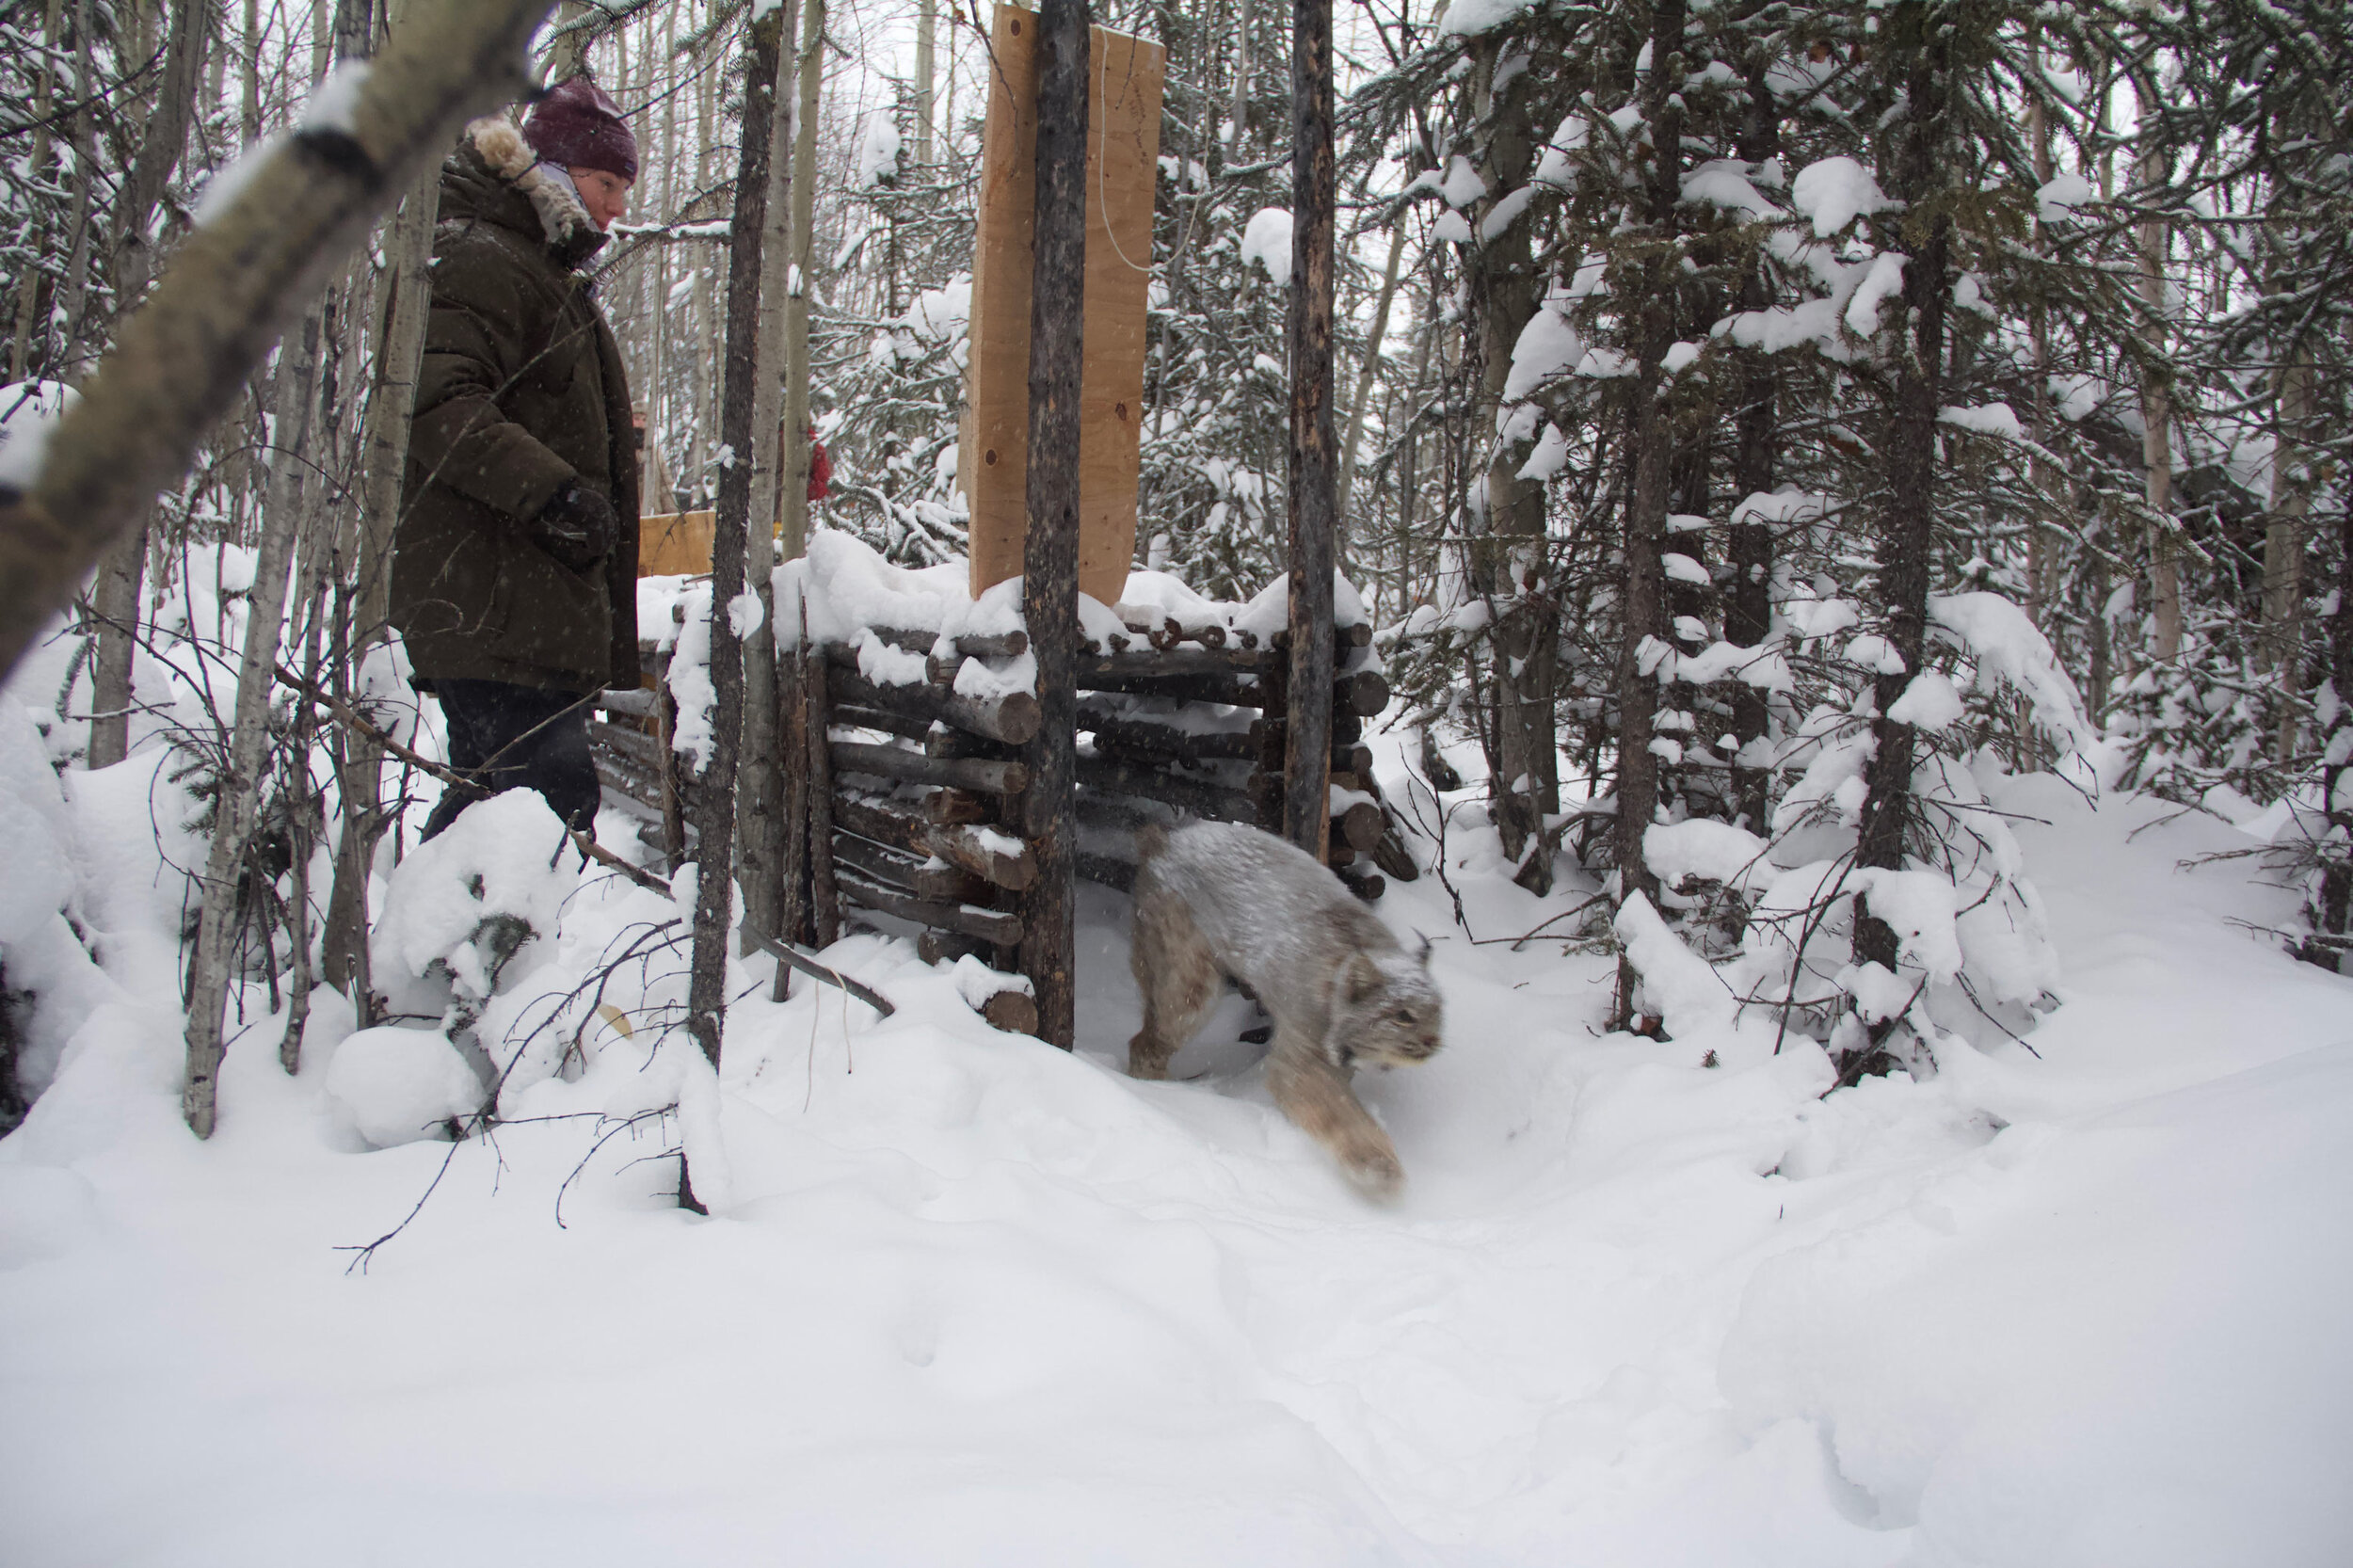  A biologist lifts the door to a log-cabin style  humane trap as a lynx darts out. Biologists use these traps to collar lynx and study their movements throughout the landscape.  